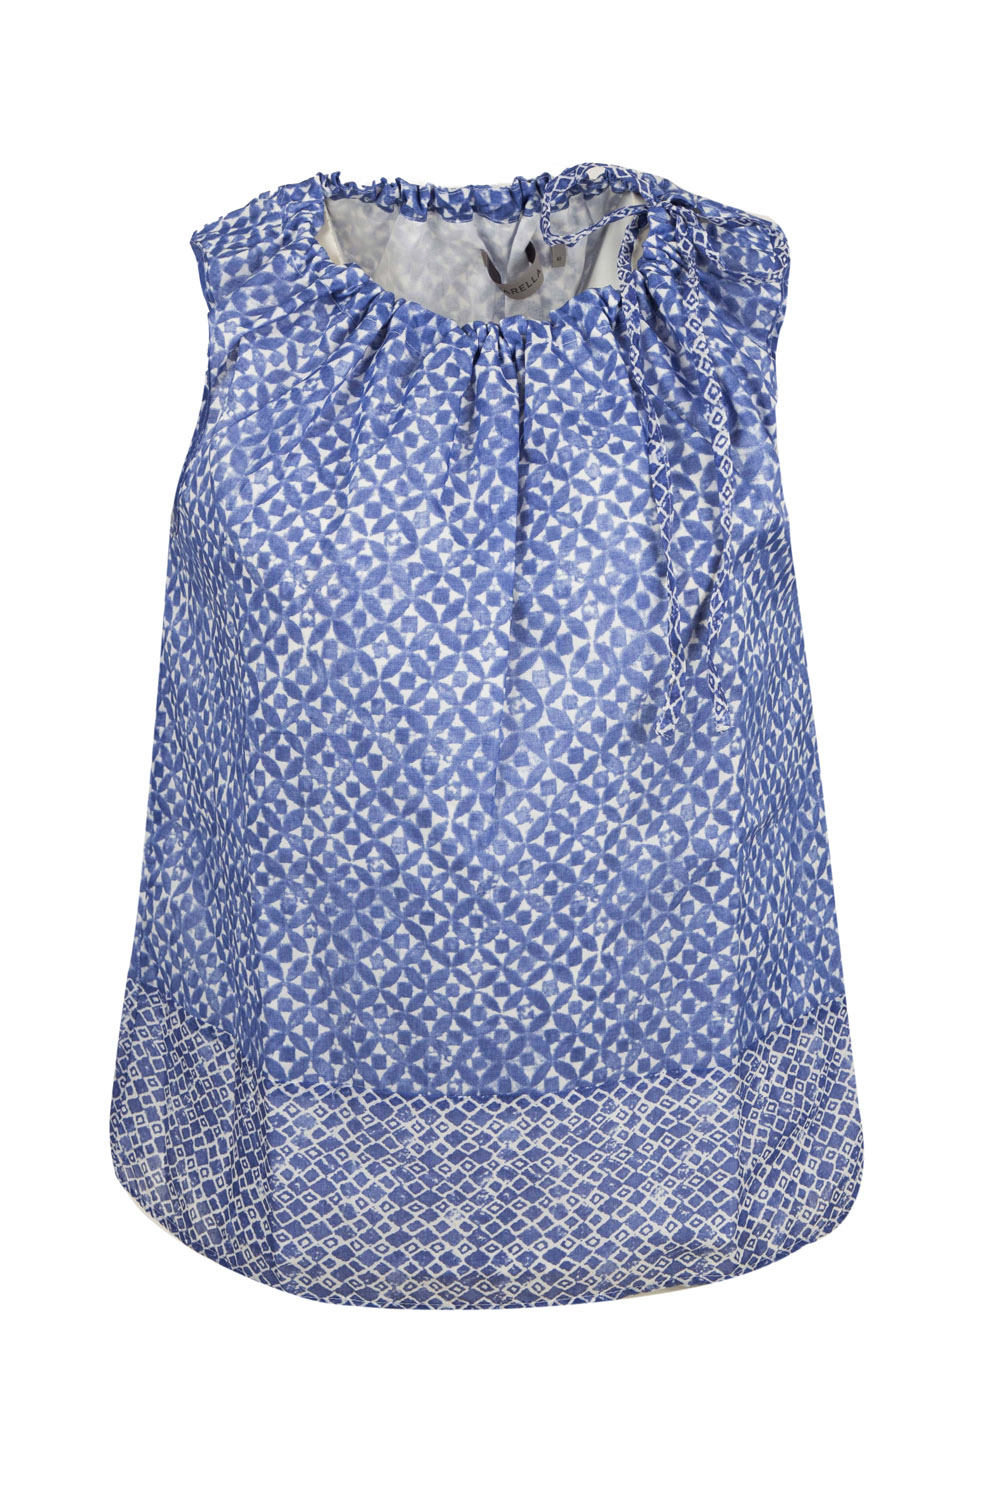 Ruched Patterned Top with Different Hemline